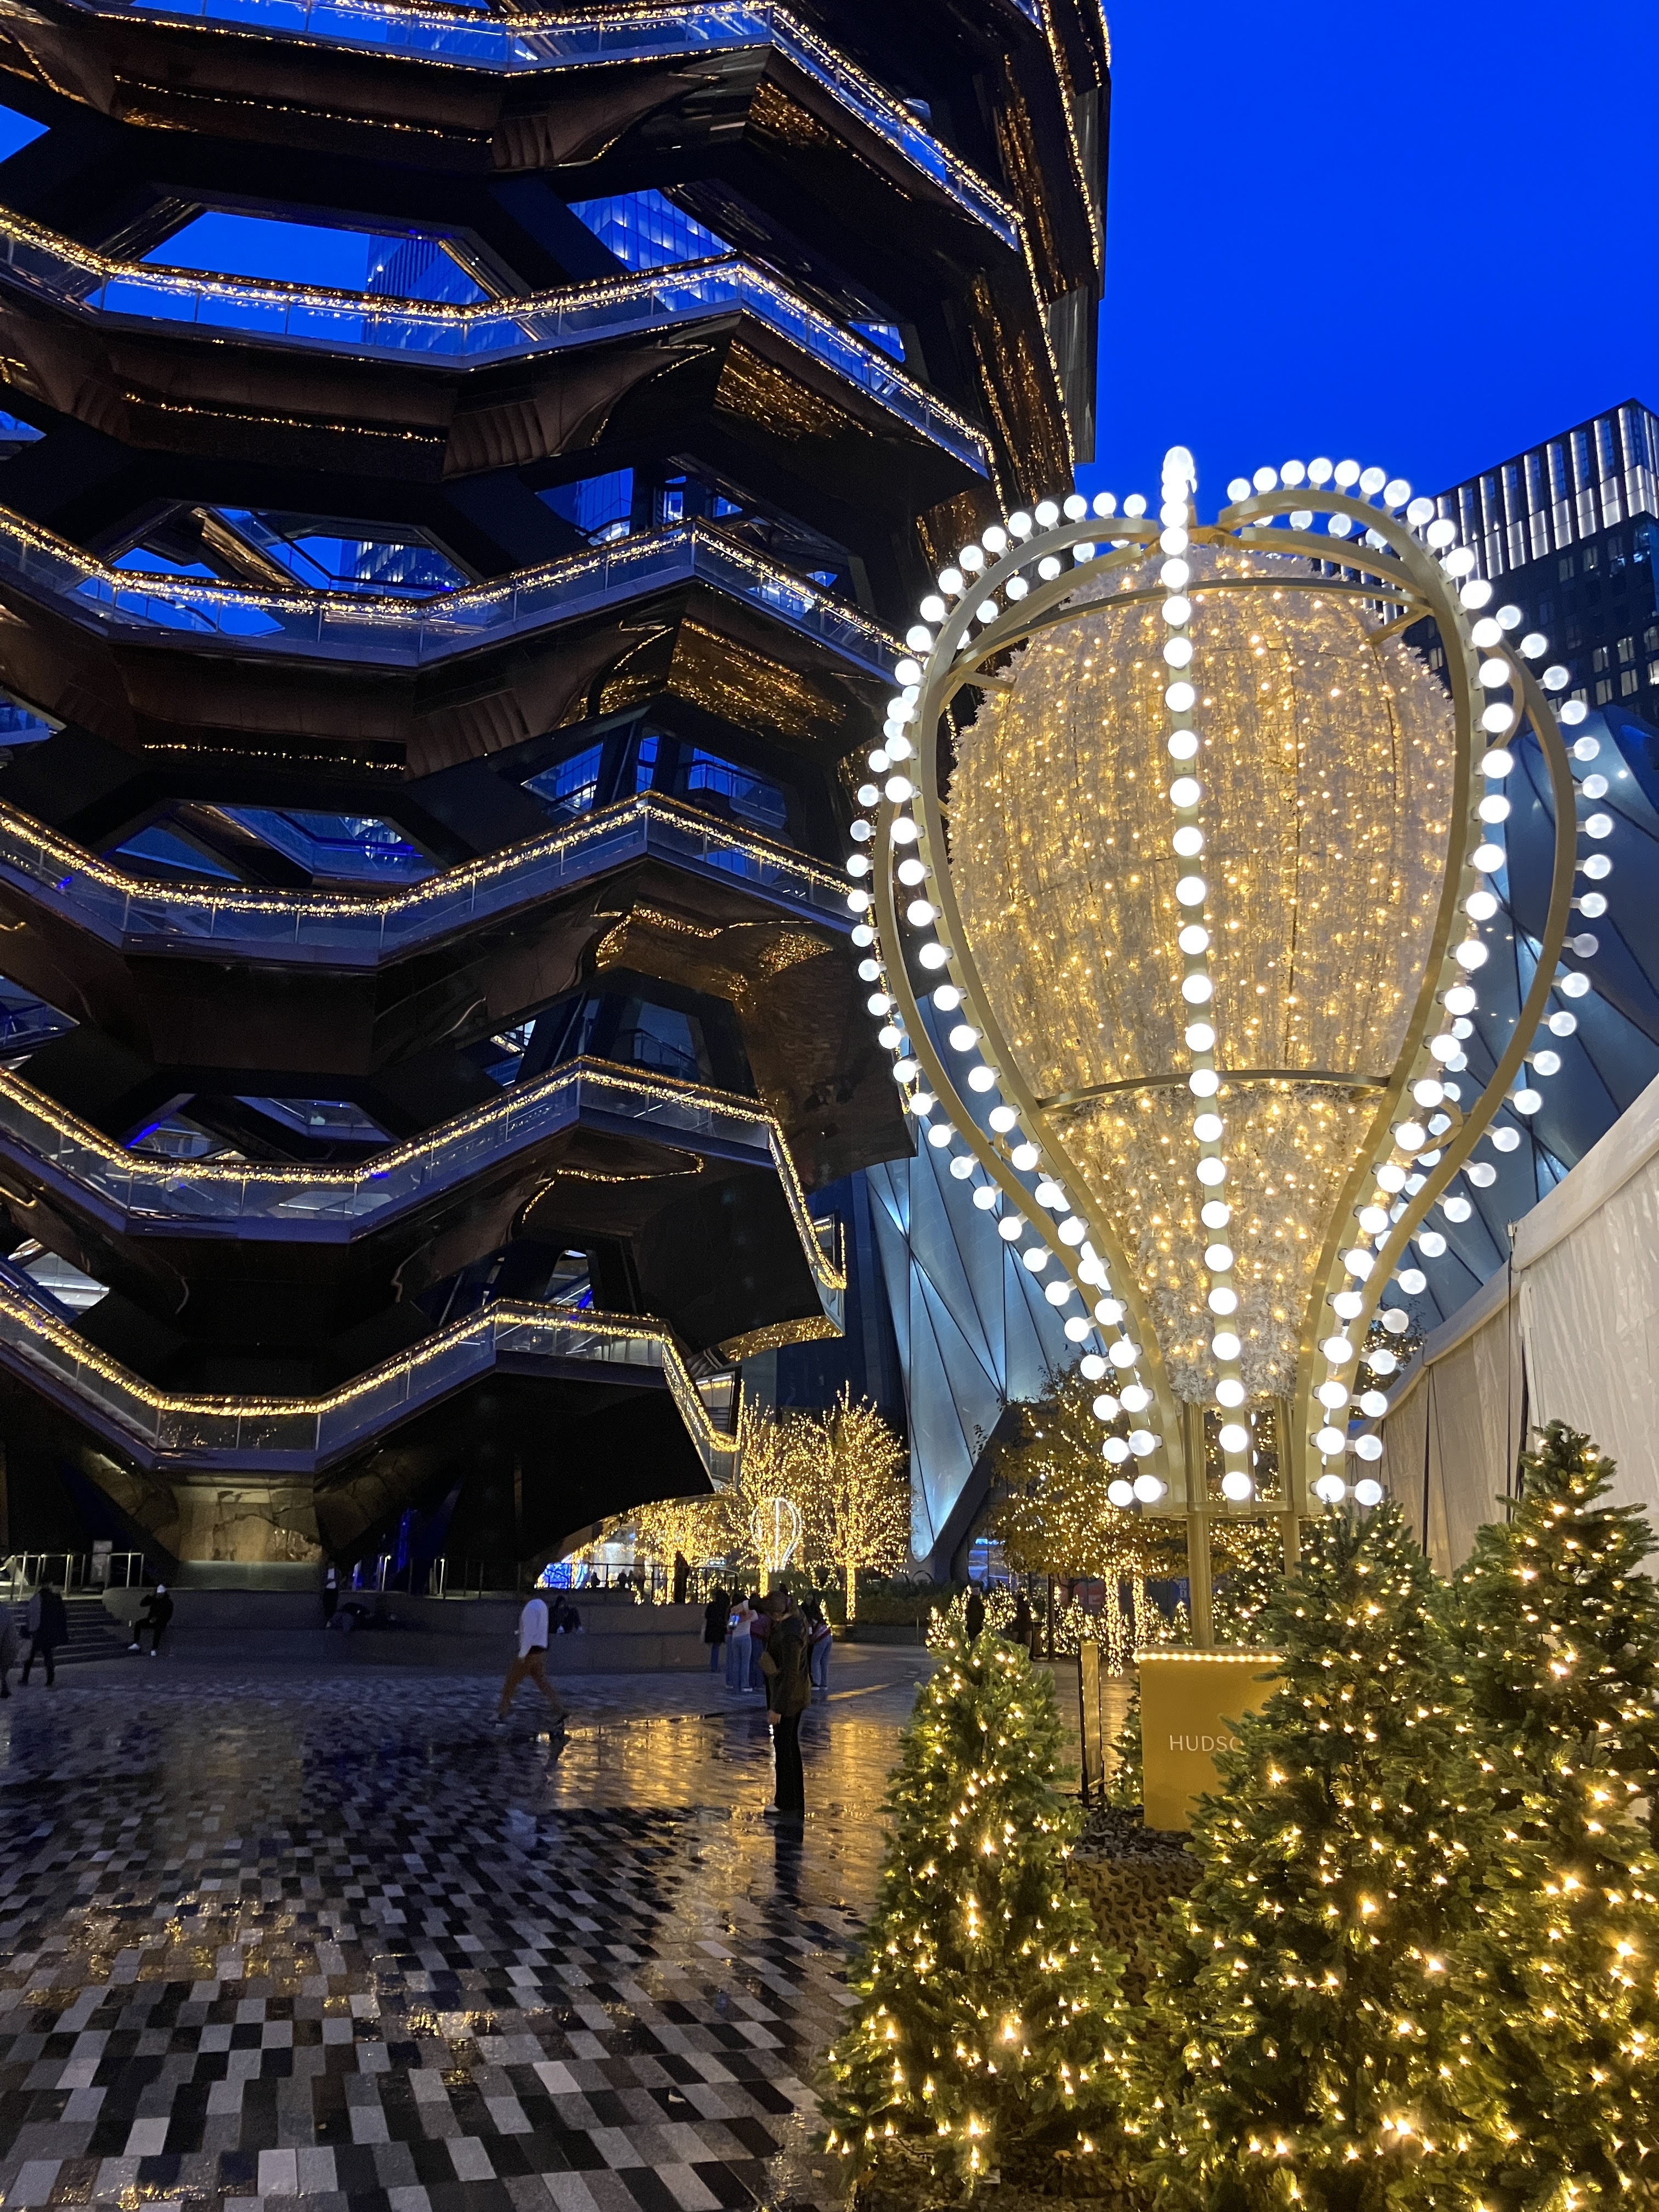 Hudson Yards Christmas Lights, What to do in NYC at Christmas, Christmas in NYC Itinerary, Three Days in NYC at Christmas, New York at Christmas, NYC Christmas Bucket List